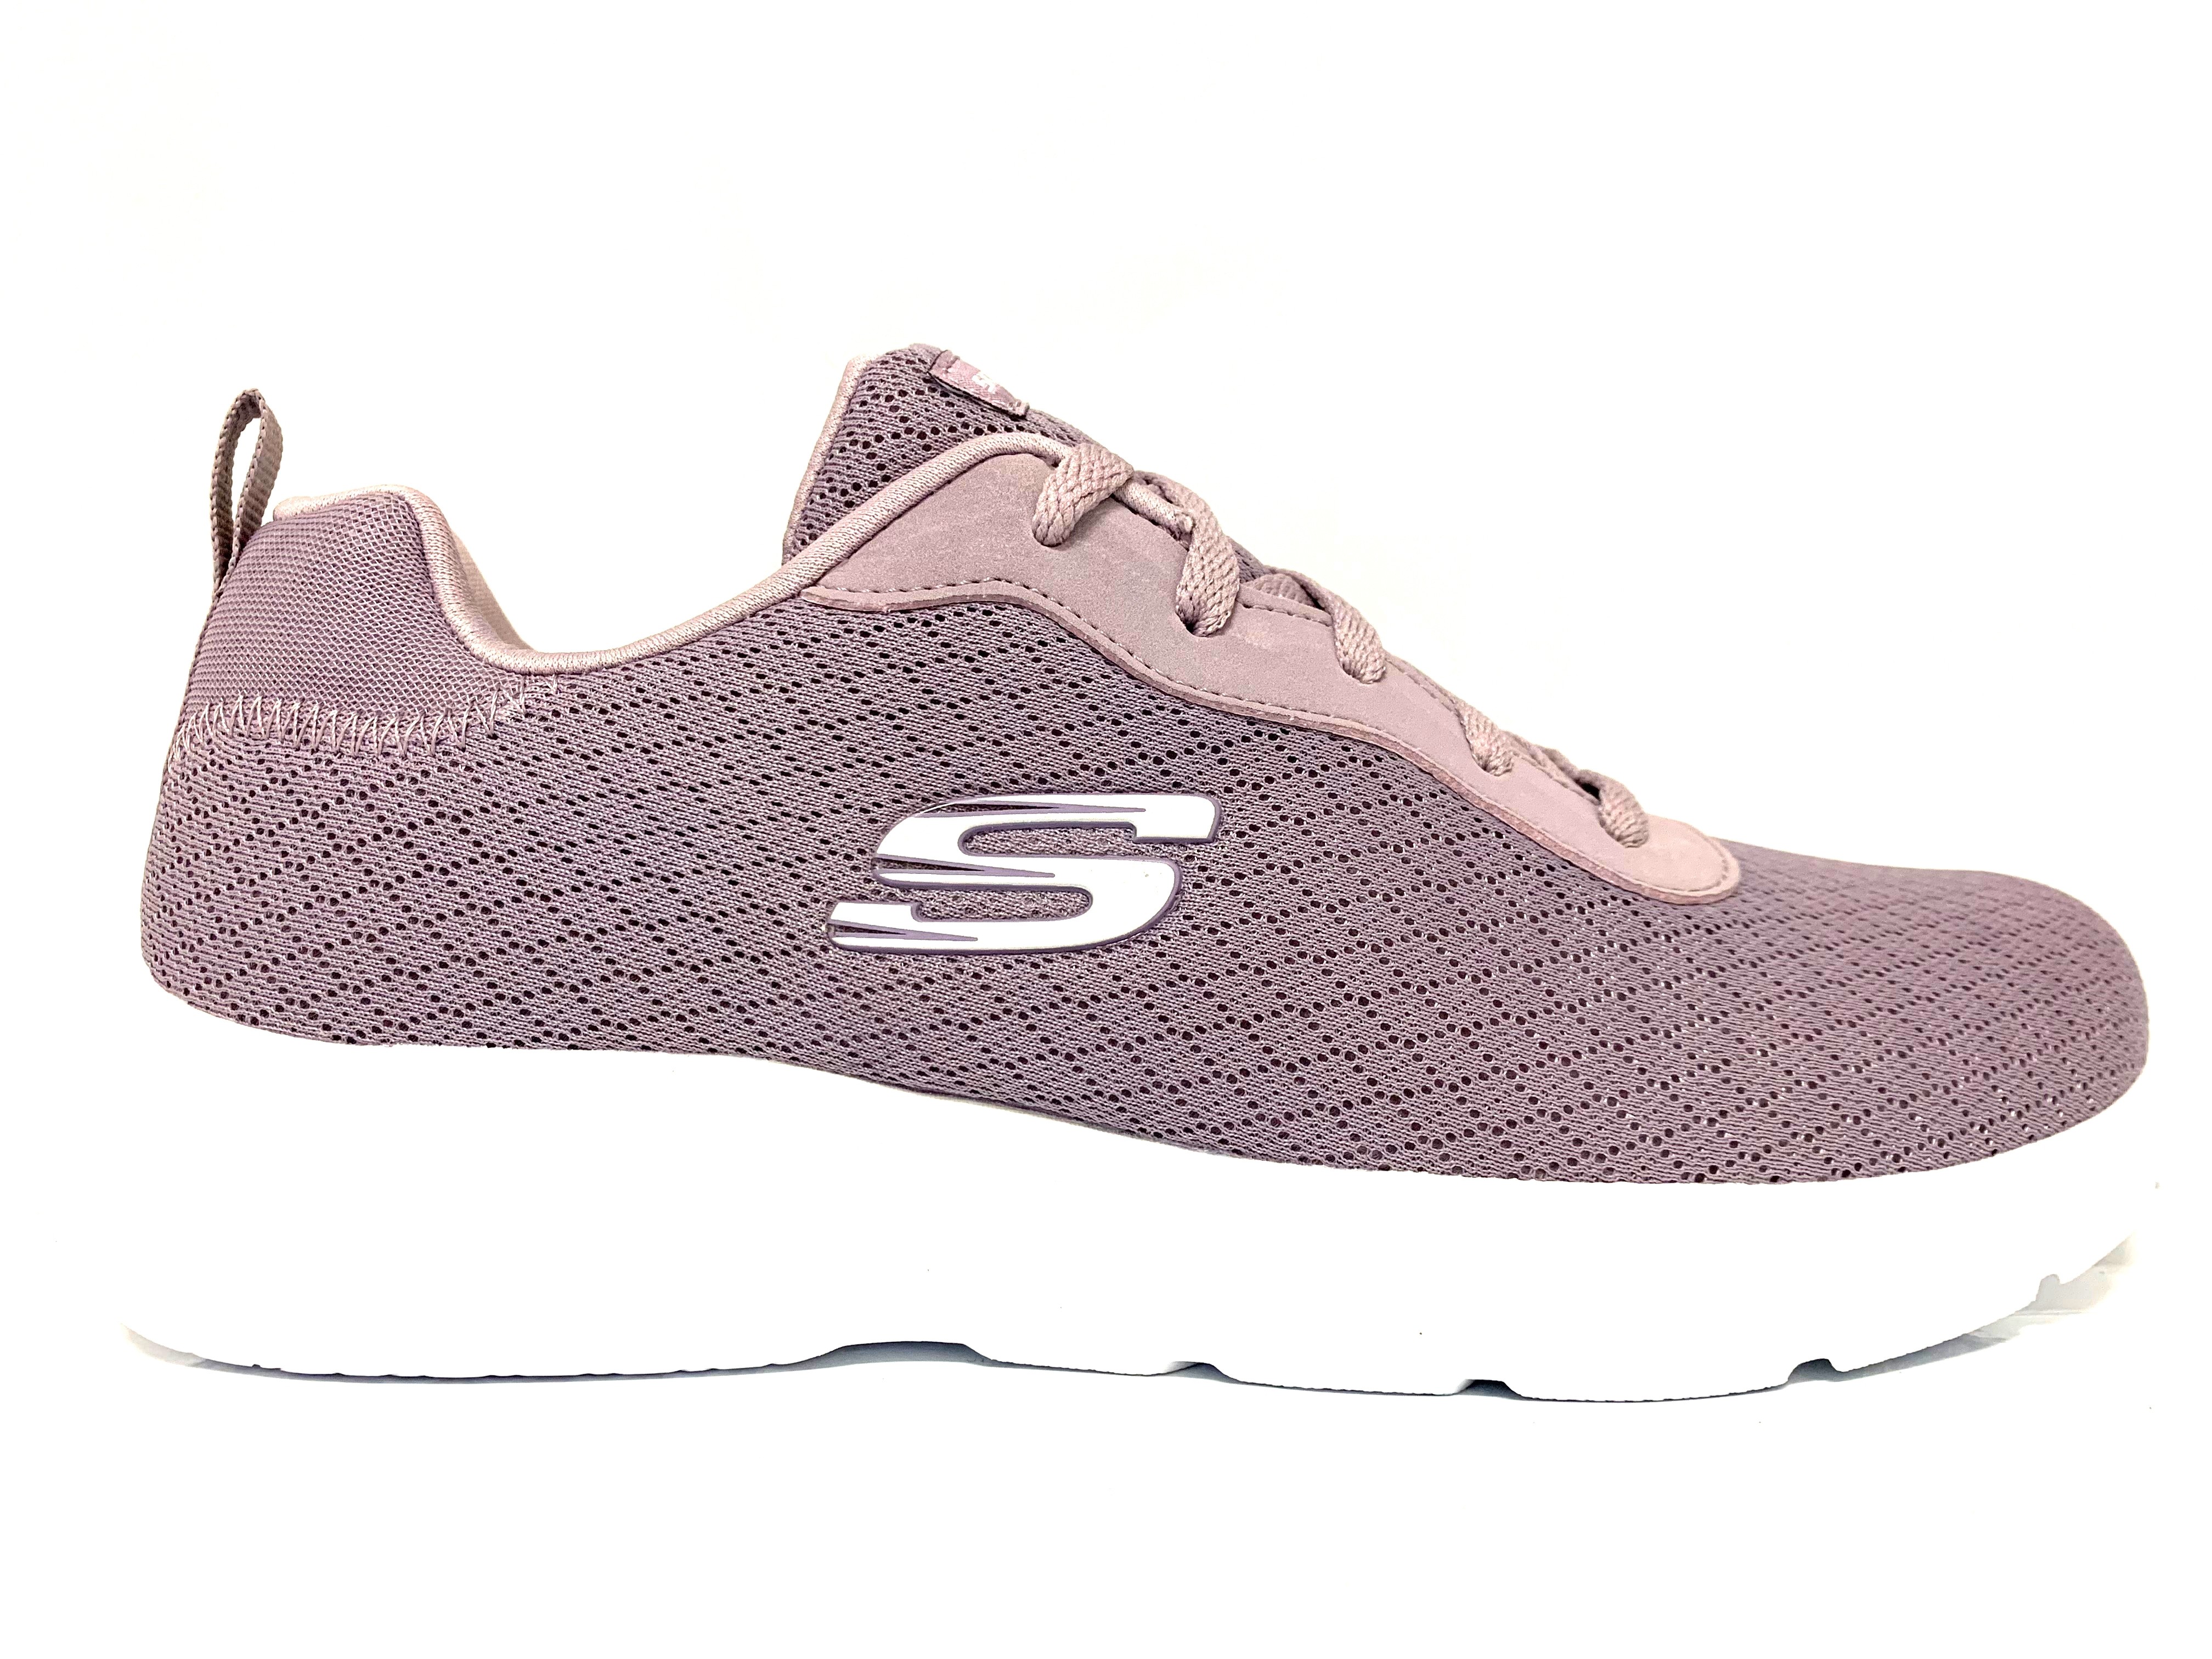 skechers lace up sneakers espana